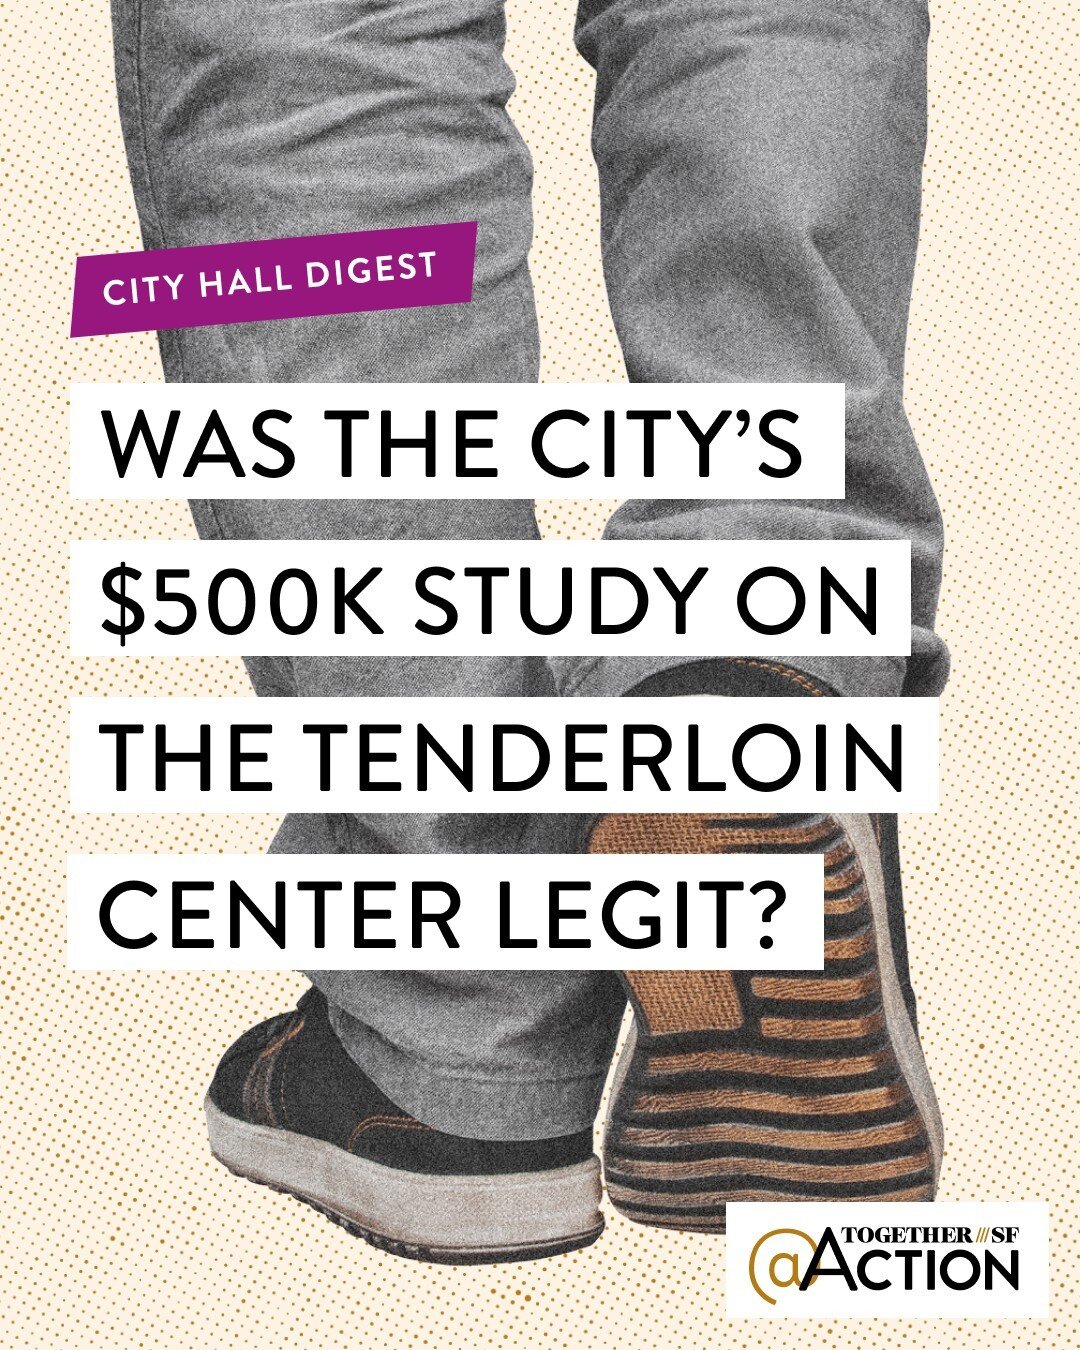 A recent report on the state of the Tenderloin and the efficacy of the Tenderloin Center by a contractor for the @sfpublichealth department showed that the center&rsquo;s efforts have been successful&mdash;but the study&rsquo;s results and methods ar